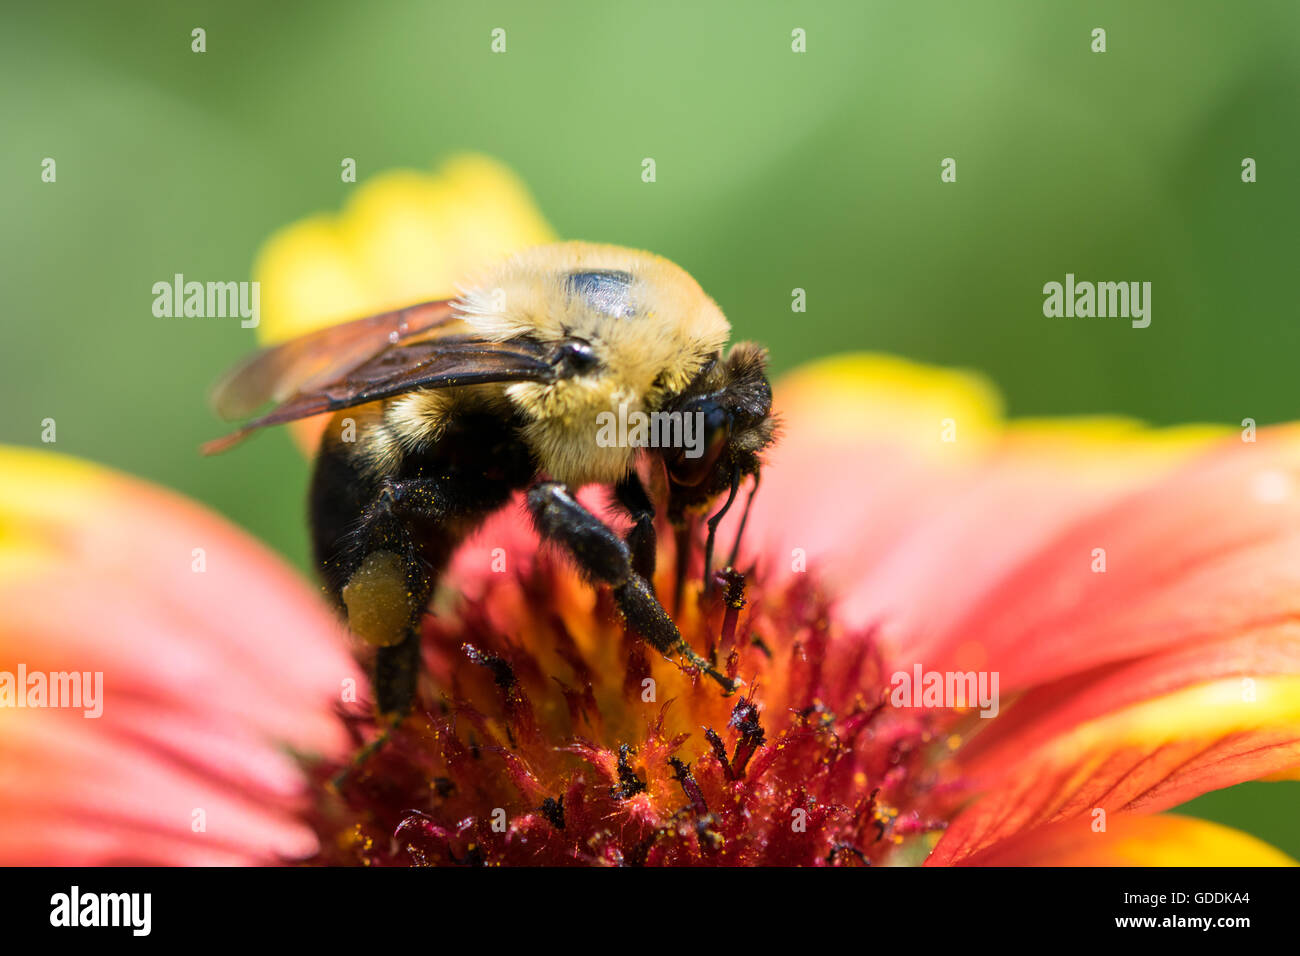 Honey Bee Pollinating a Flower Stock Photo